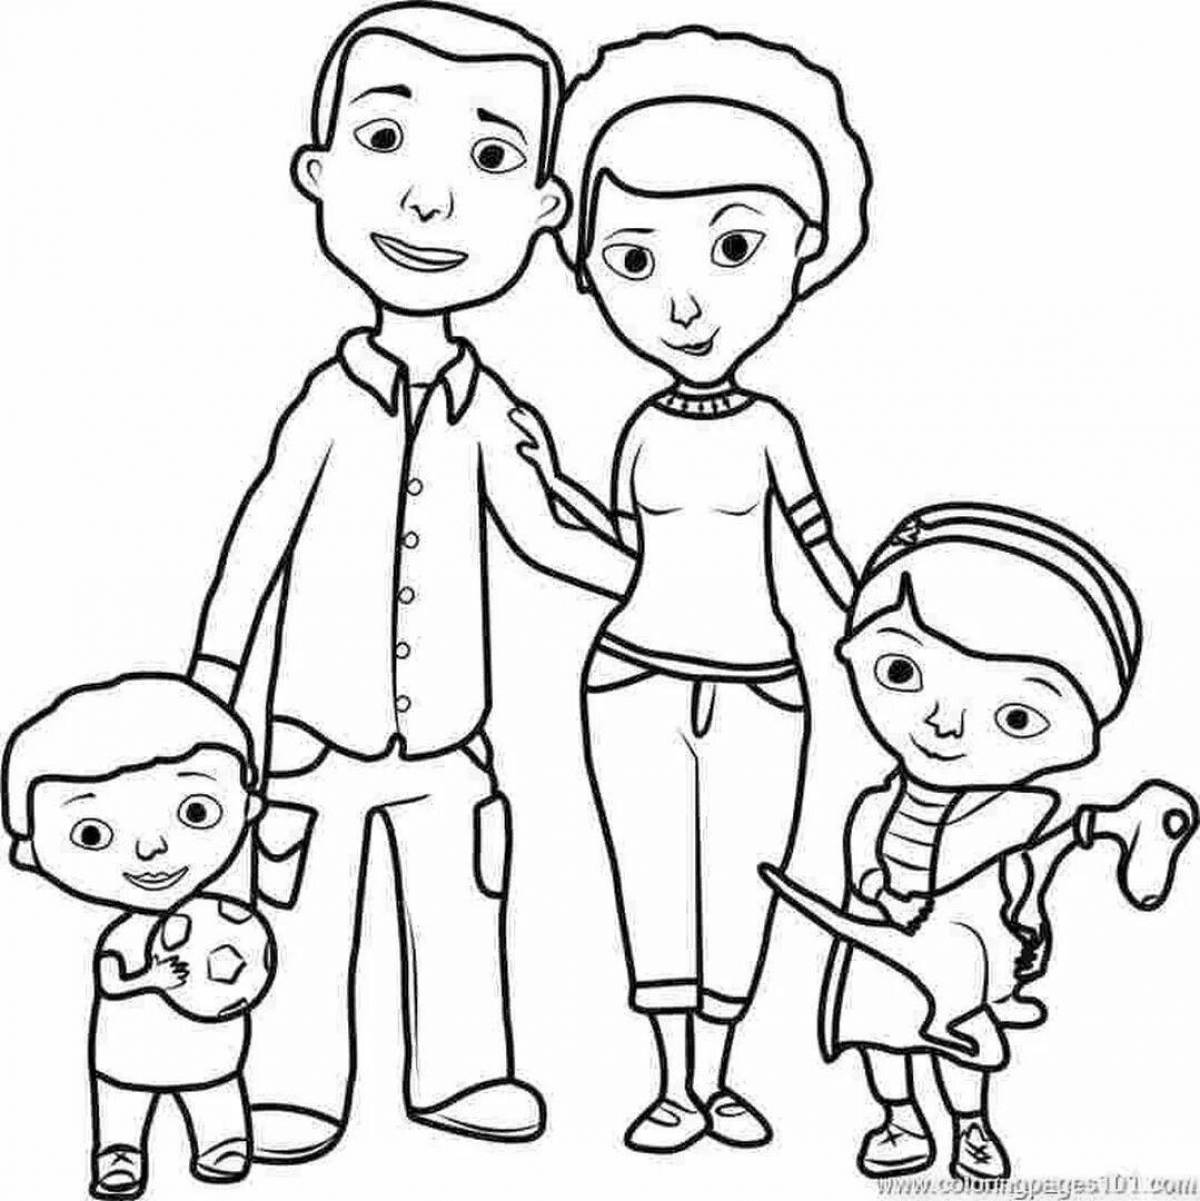 Inspiring mom and dad coloring book for kids